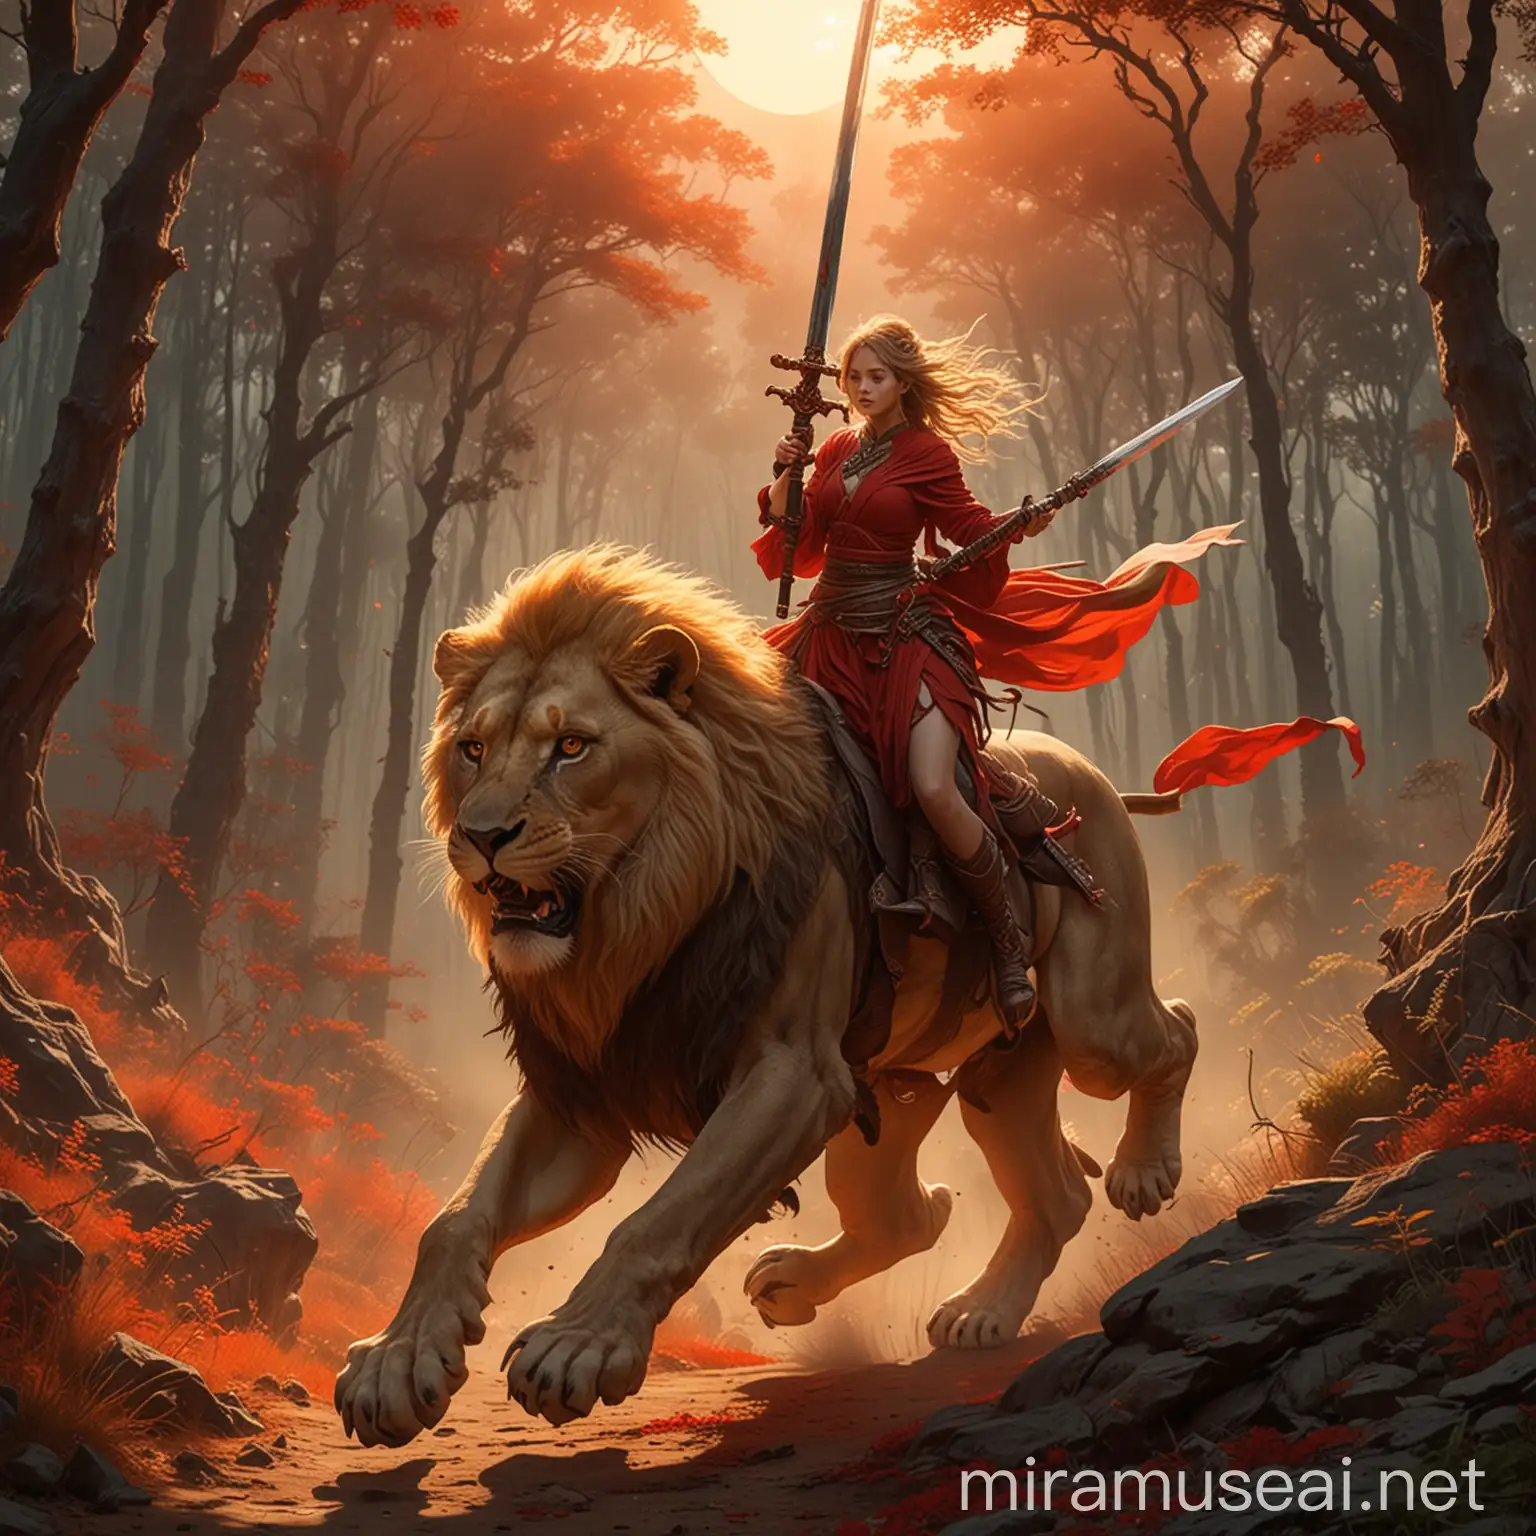 Brave Women Riding Lions Through Enchanted Forests at Sunrise